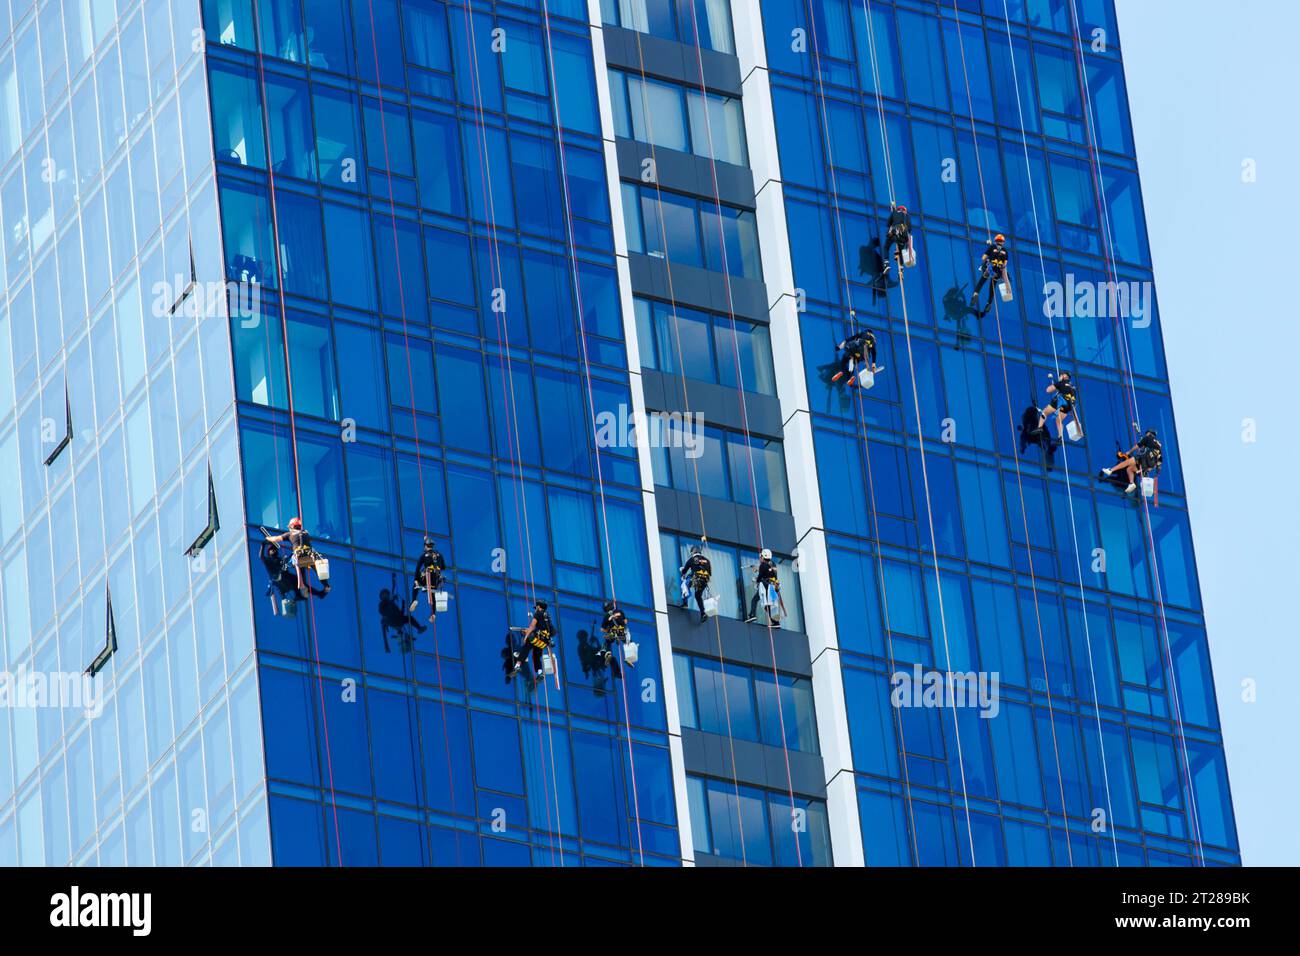 High rise window cleaners hanging from ropes cleaning a skyscraper’s windows Stock Photo